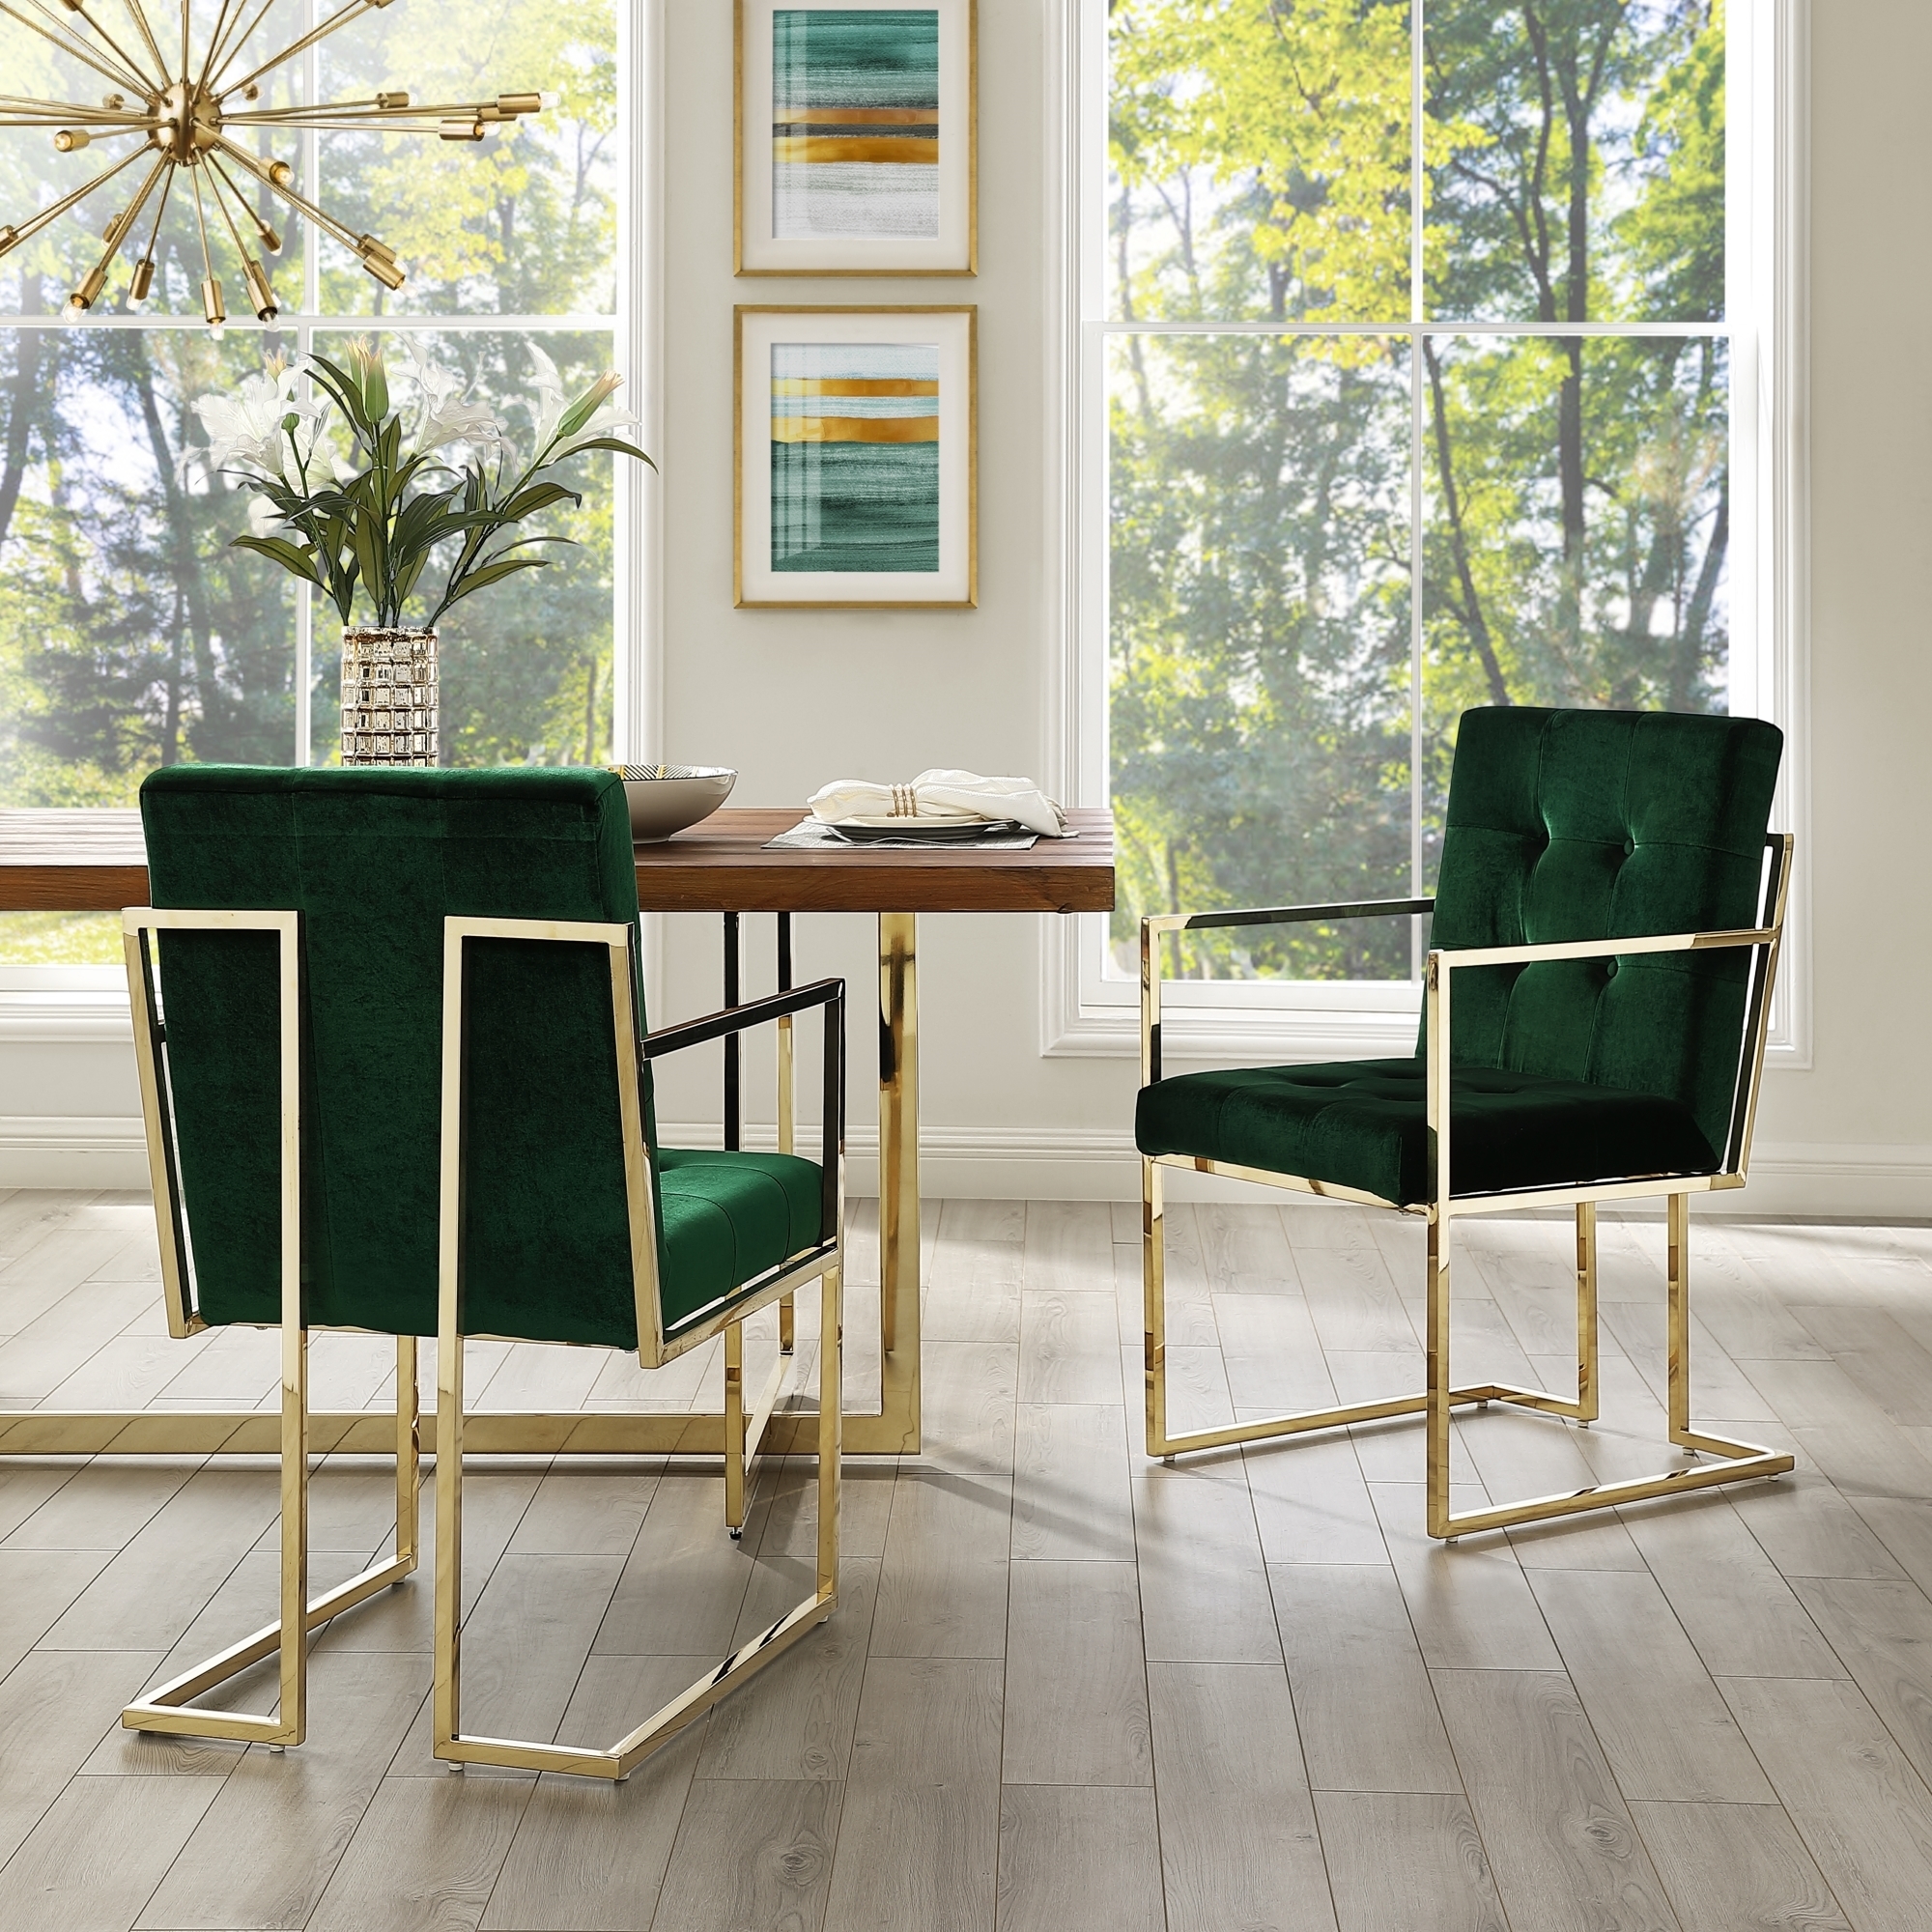 Cecille PU Leather Or Velvet Dining Chair-Set Of 2-Chrome-Gold Frame-Square Arm-Button Tufted-Modern & Functional By Inspired Home - Green V